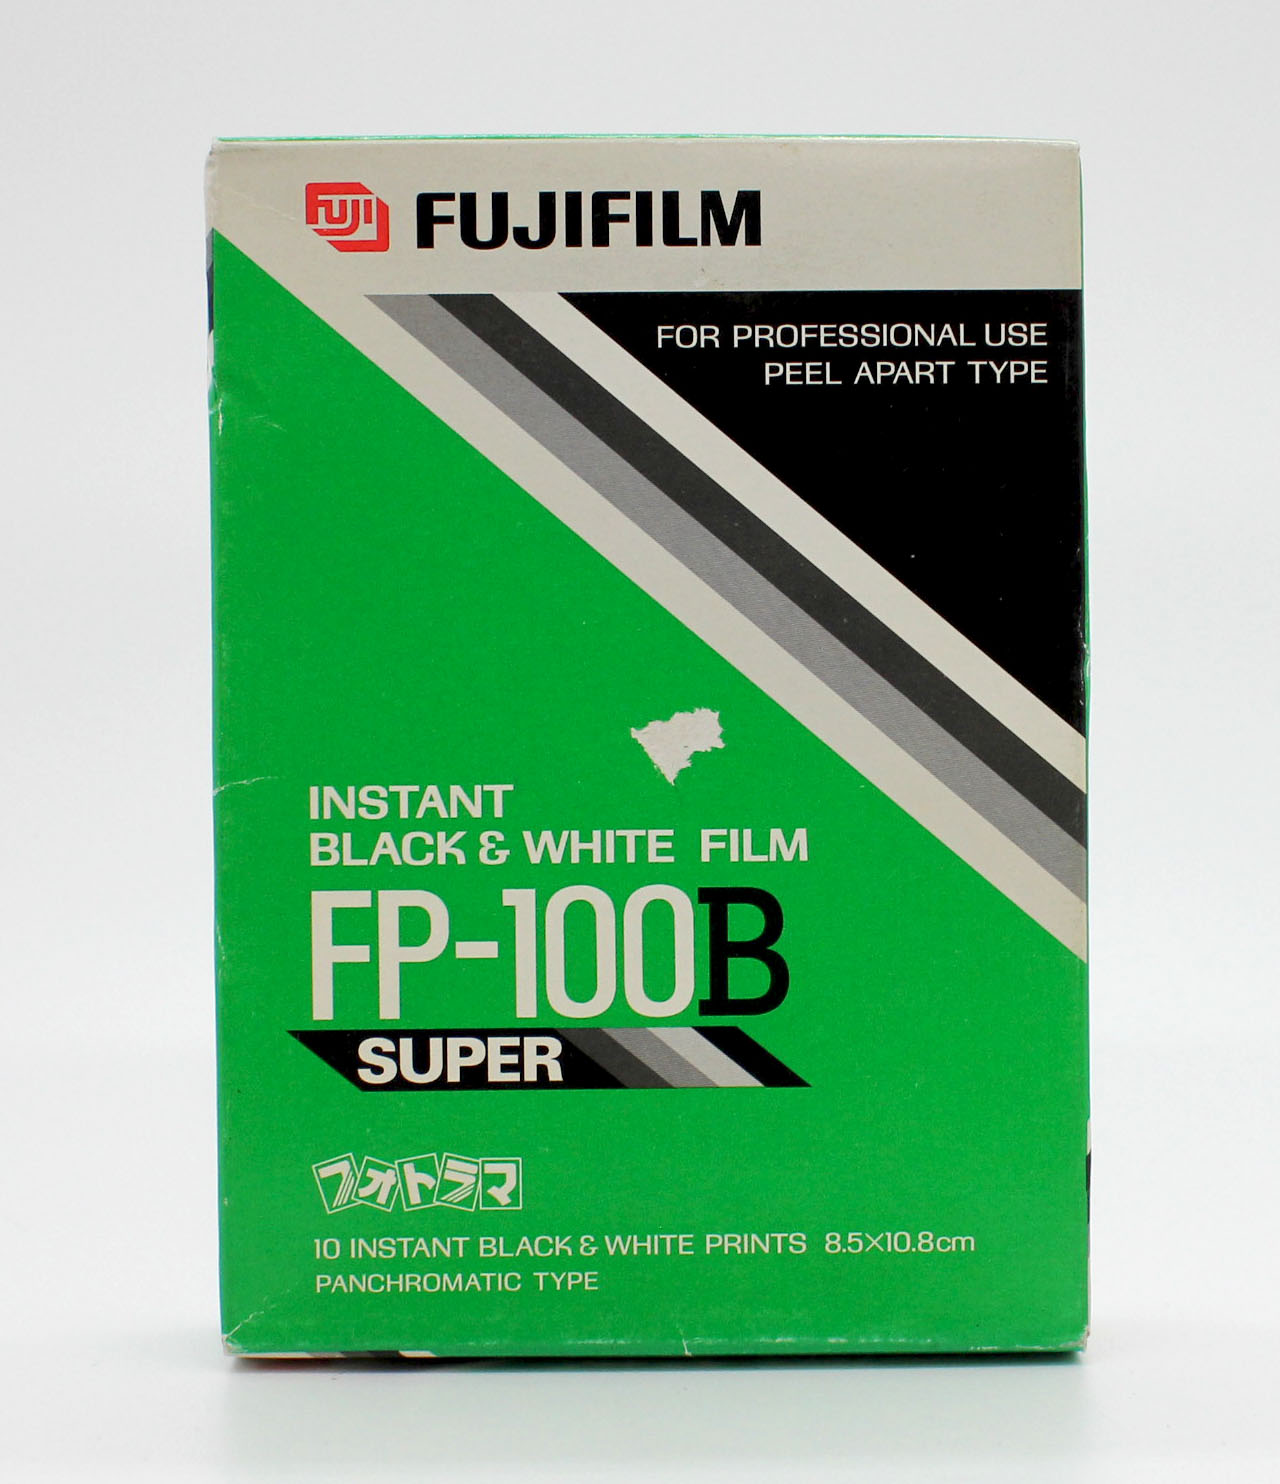 Japan Used Camera Shop | [New] Fujifilm FP-100B Instant Black & White Film (Expired 03/2002) from Japan